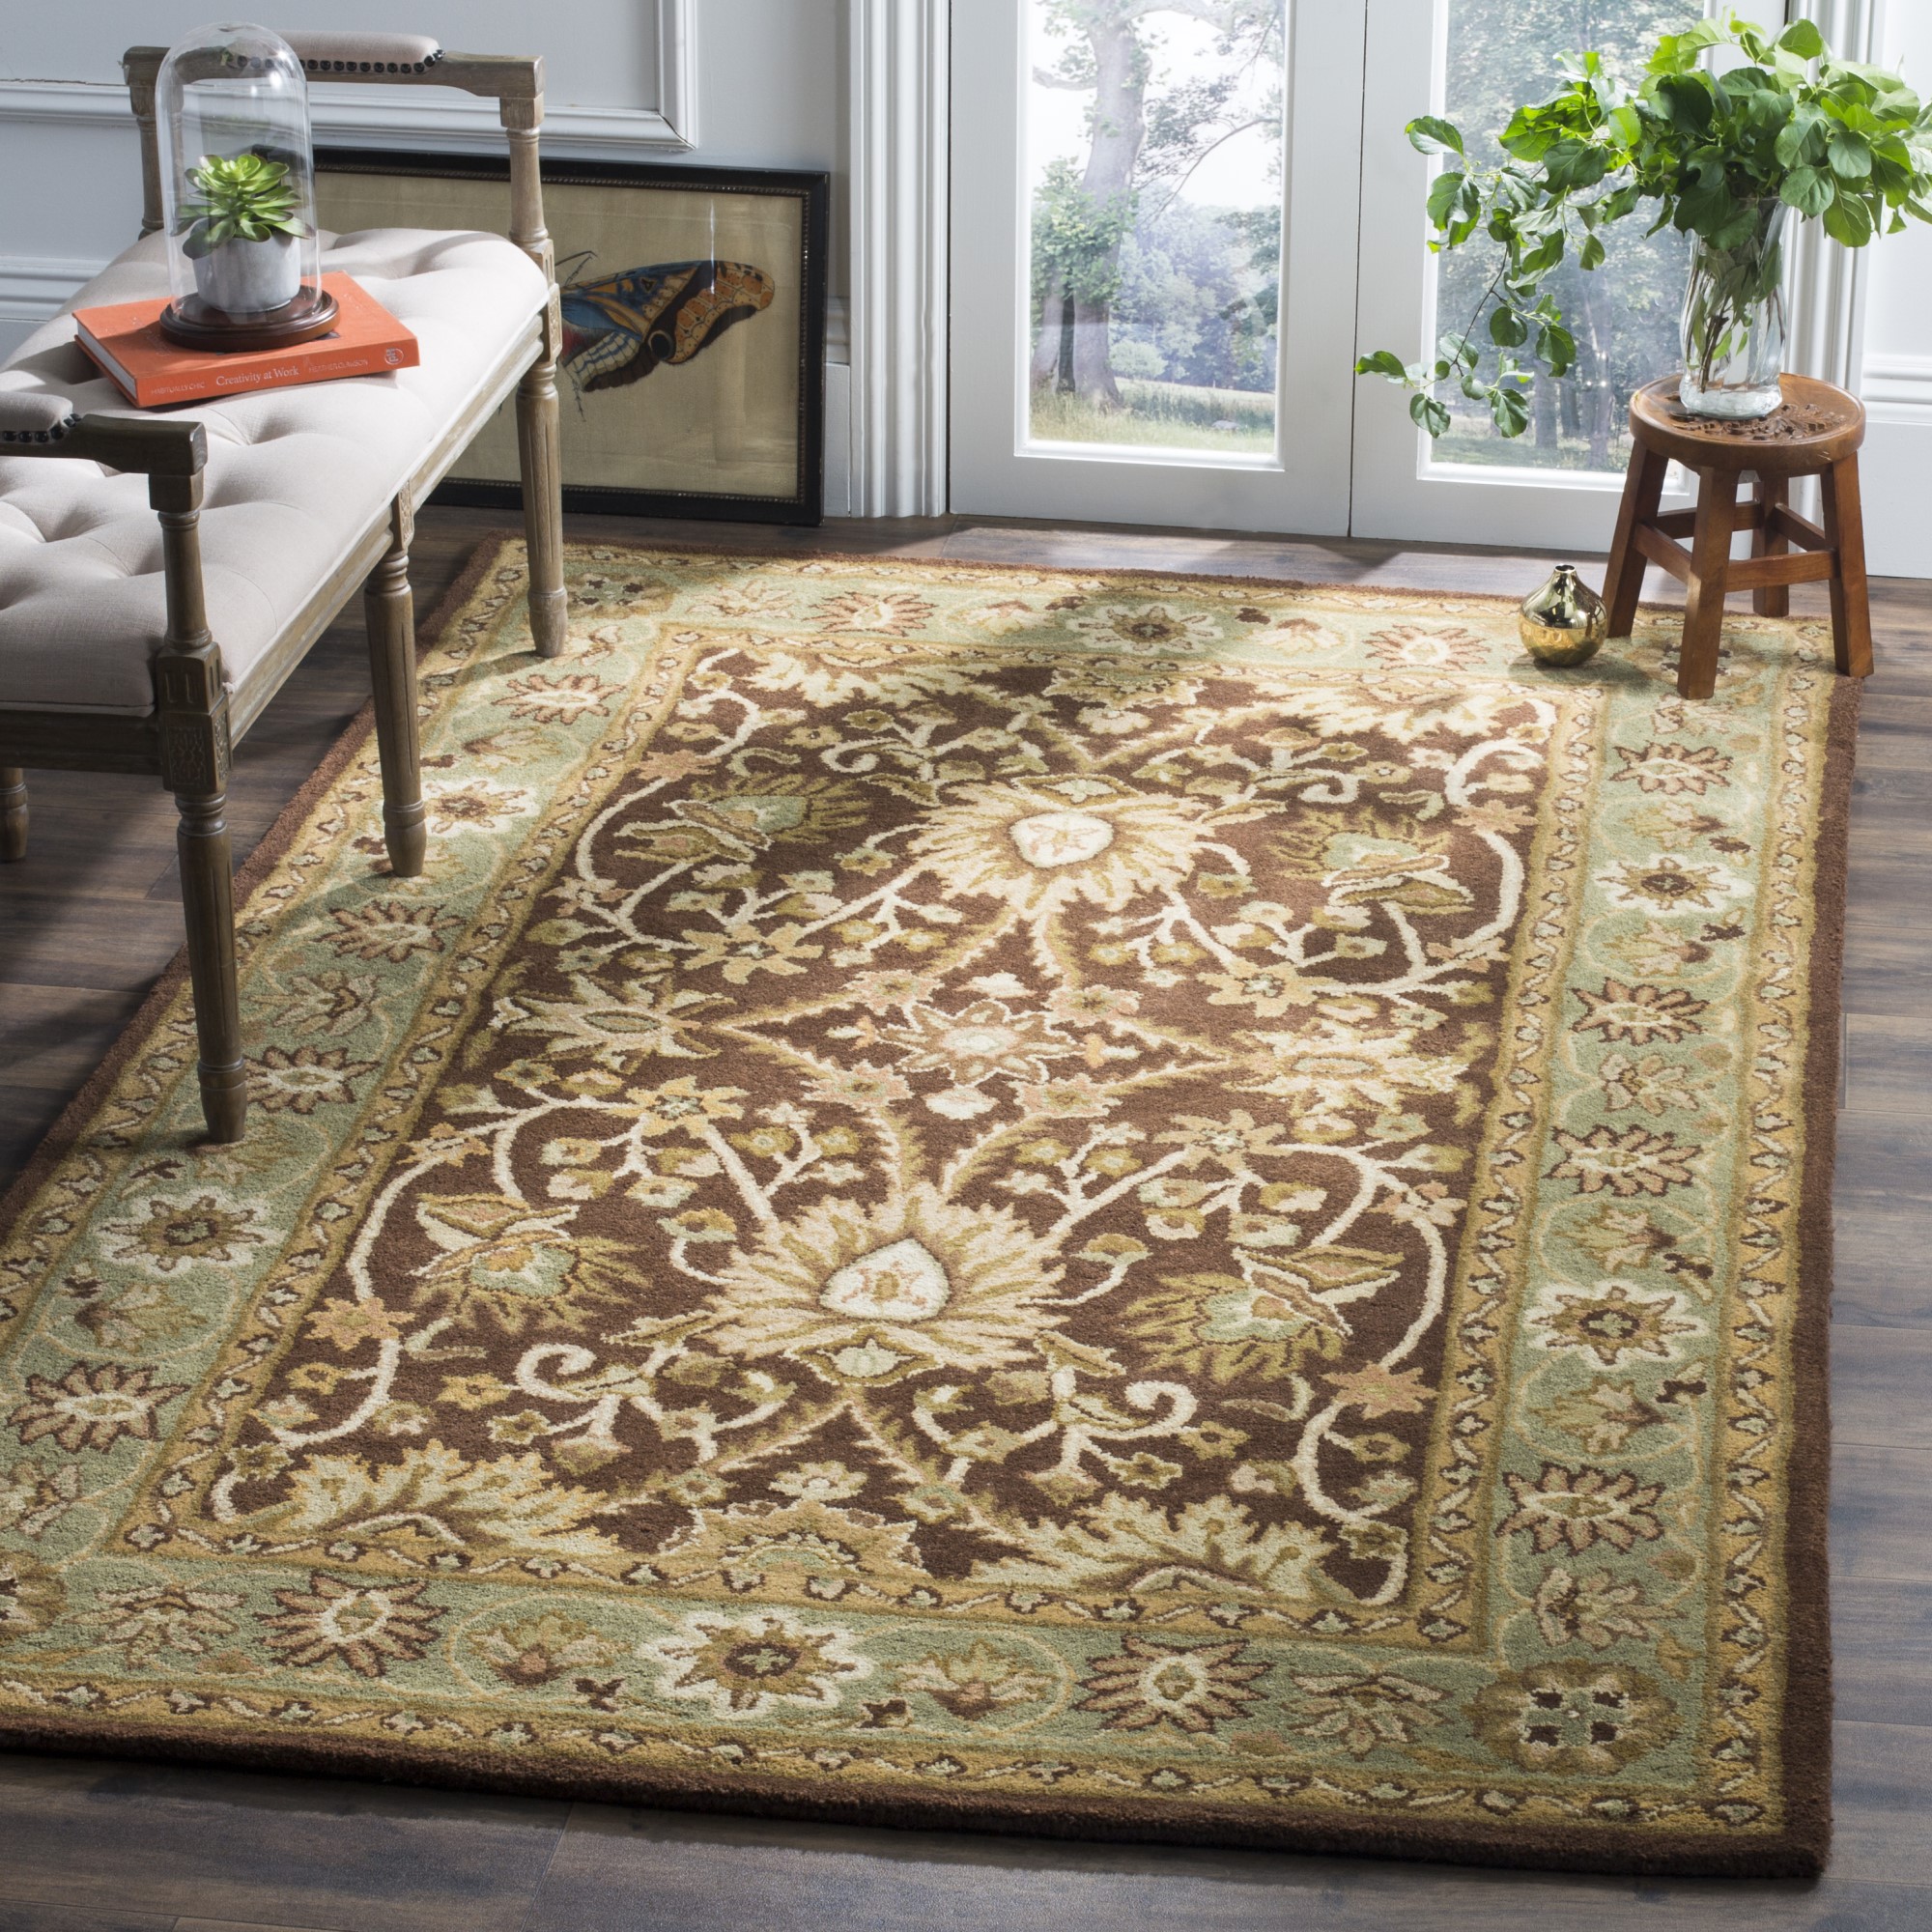 Safavieh Antiquity AT-249 Rugs Rugs Direct